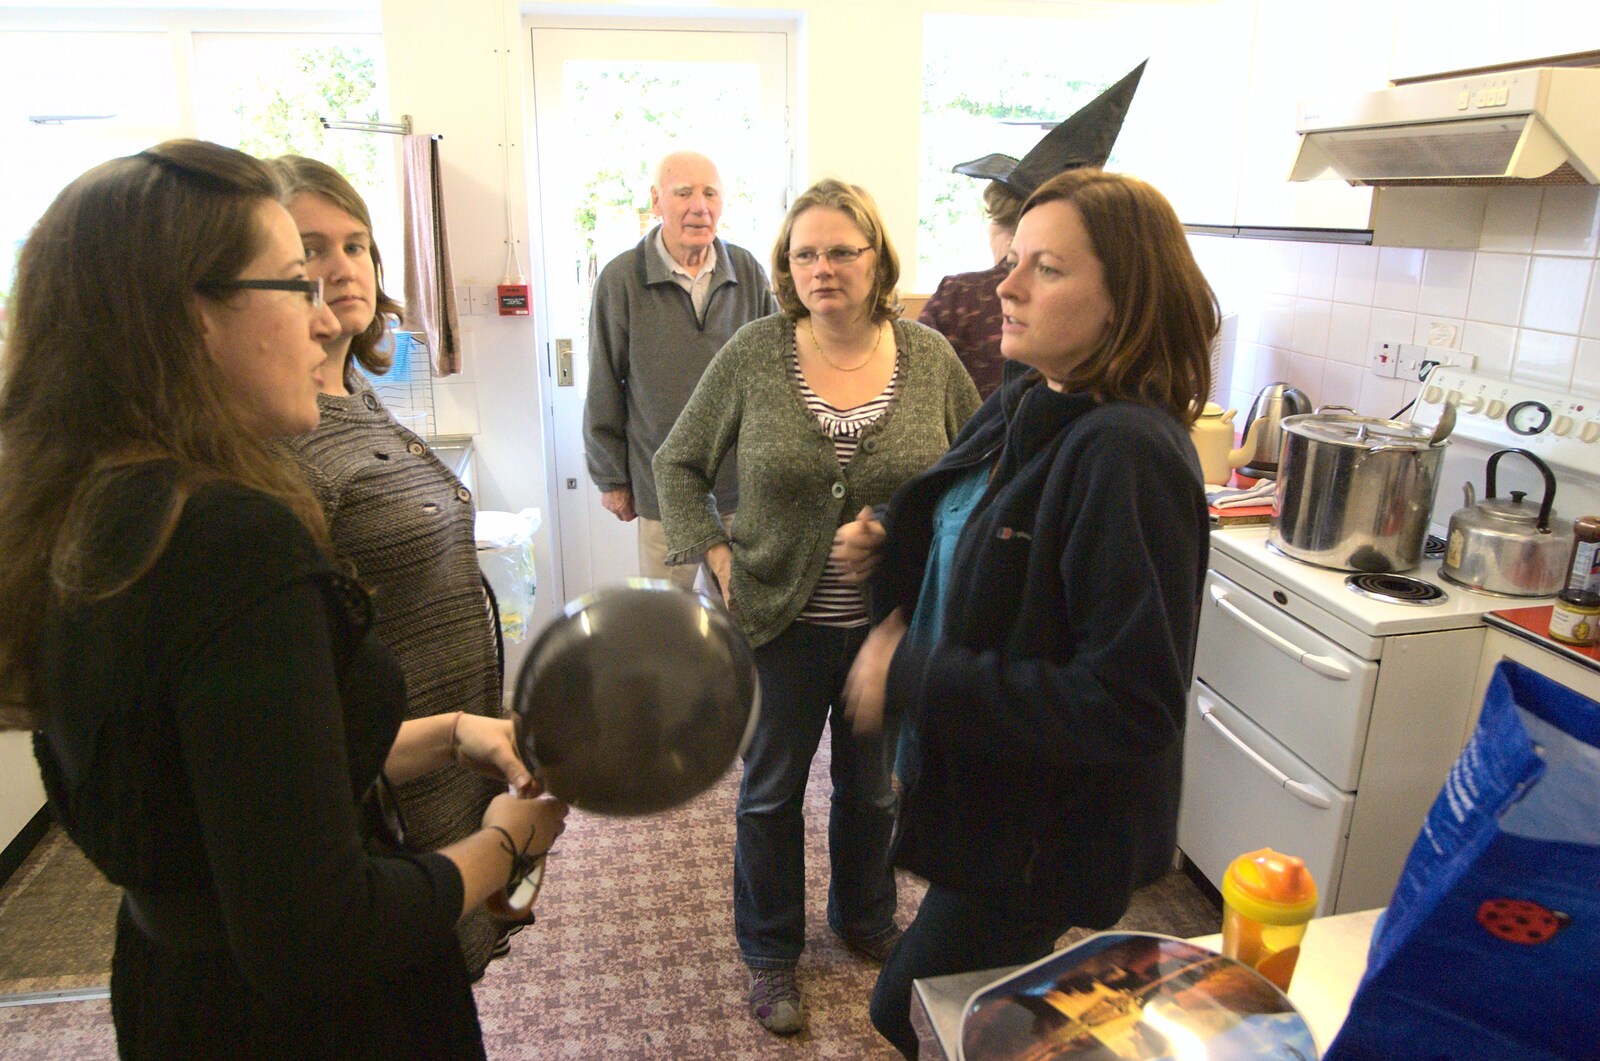 Suzanne, Isobel, Megan and Kirsty discuss catering from Amelia's Birthday, Brome Village Hall, Suffolk - 29th October 2011